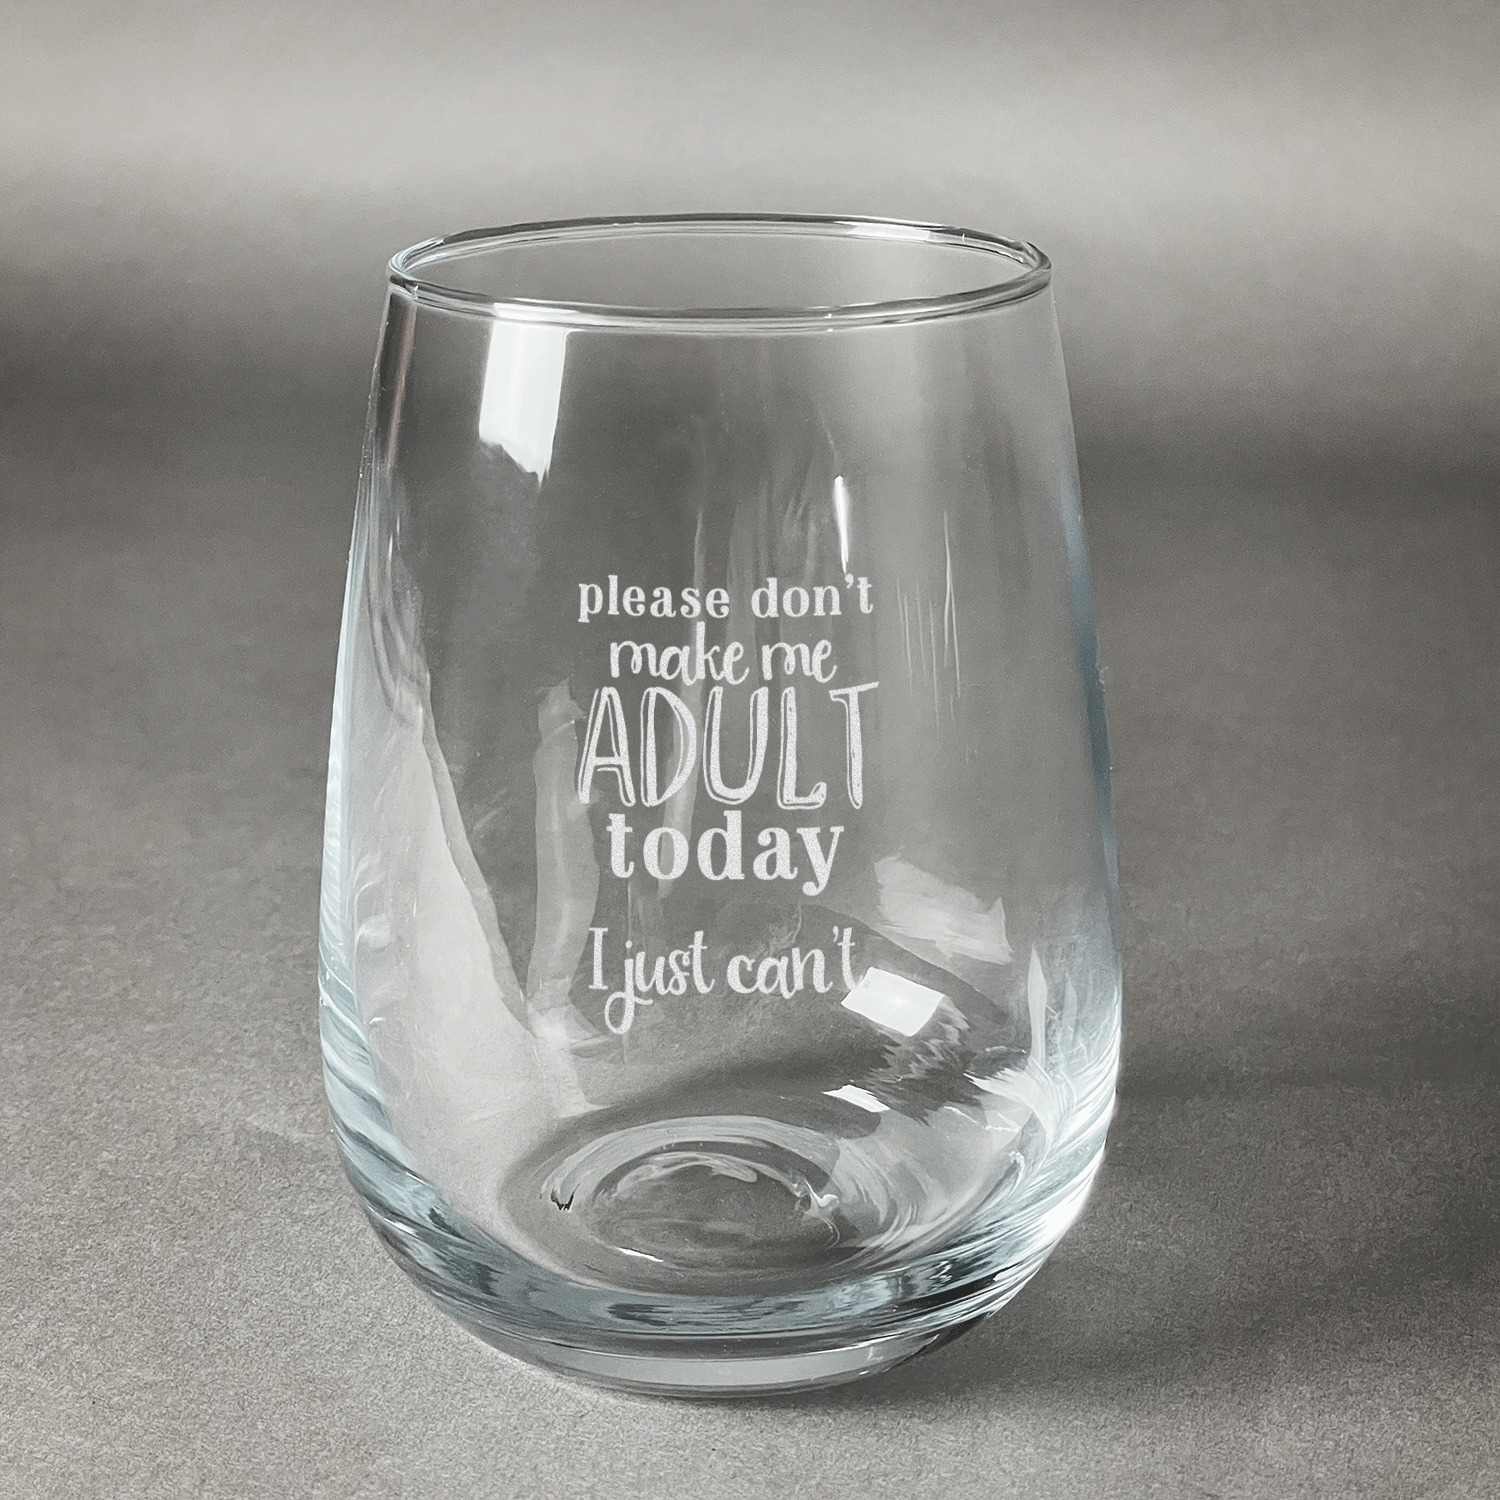 https://www.youcustomizeit.com/common/MAKE/1038321/Funny-Quotes-and-Sayings-Stemless-Wine-Glass-Front-Approval.jpg?lm=1682544425